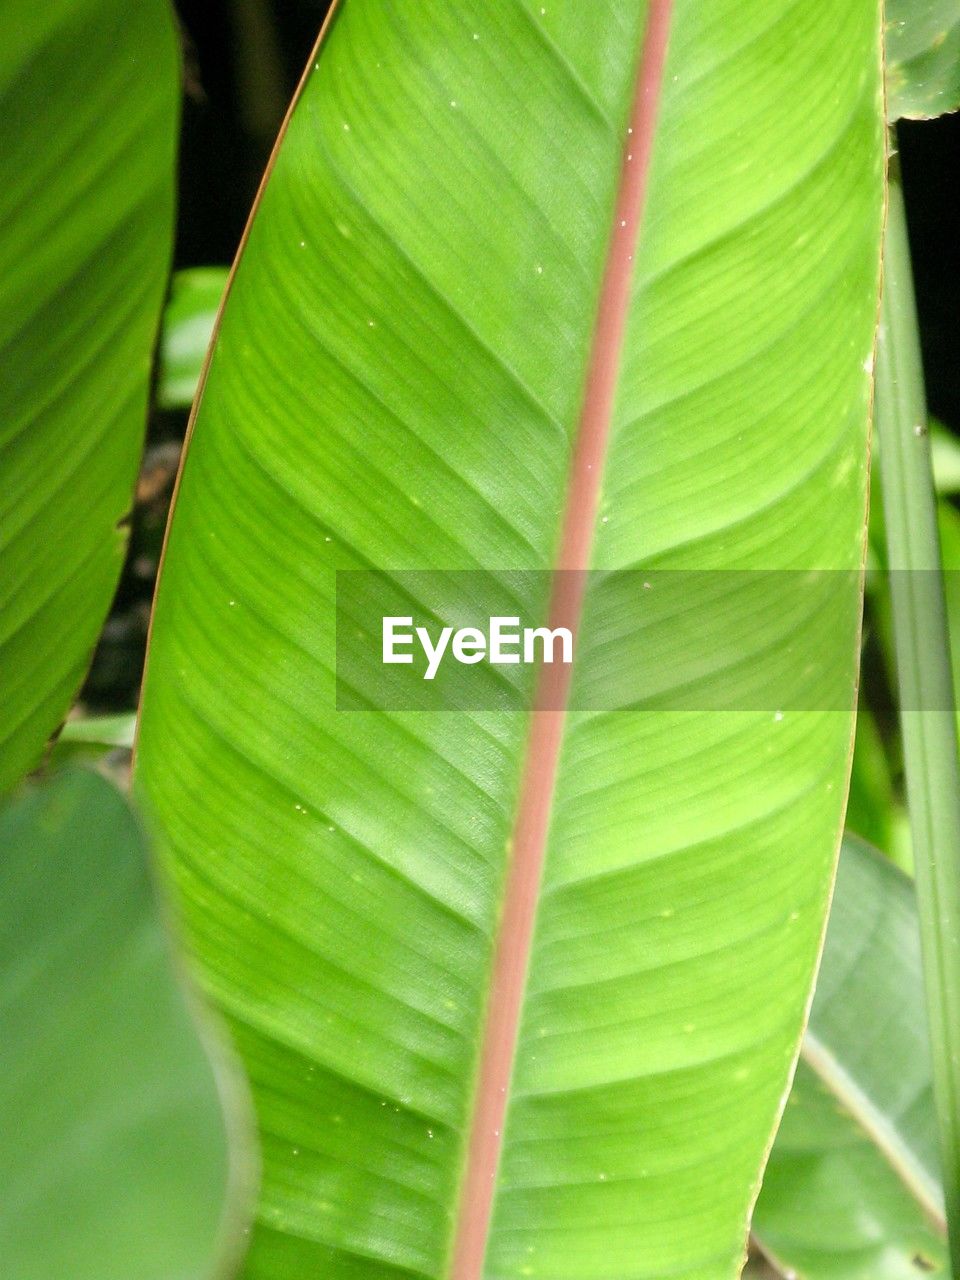 leaf, green, plant part, banana leaf, plant, close-up, nature, growth, no people, beauty in nature, flower, leaves, plant stem, tree, banana tree, freshness, day, tropical climate, leaf vein, palm leaf, outdoors, palm tree, pattern, banana, full frame